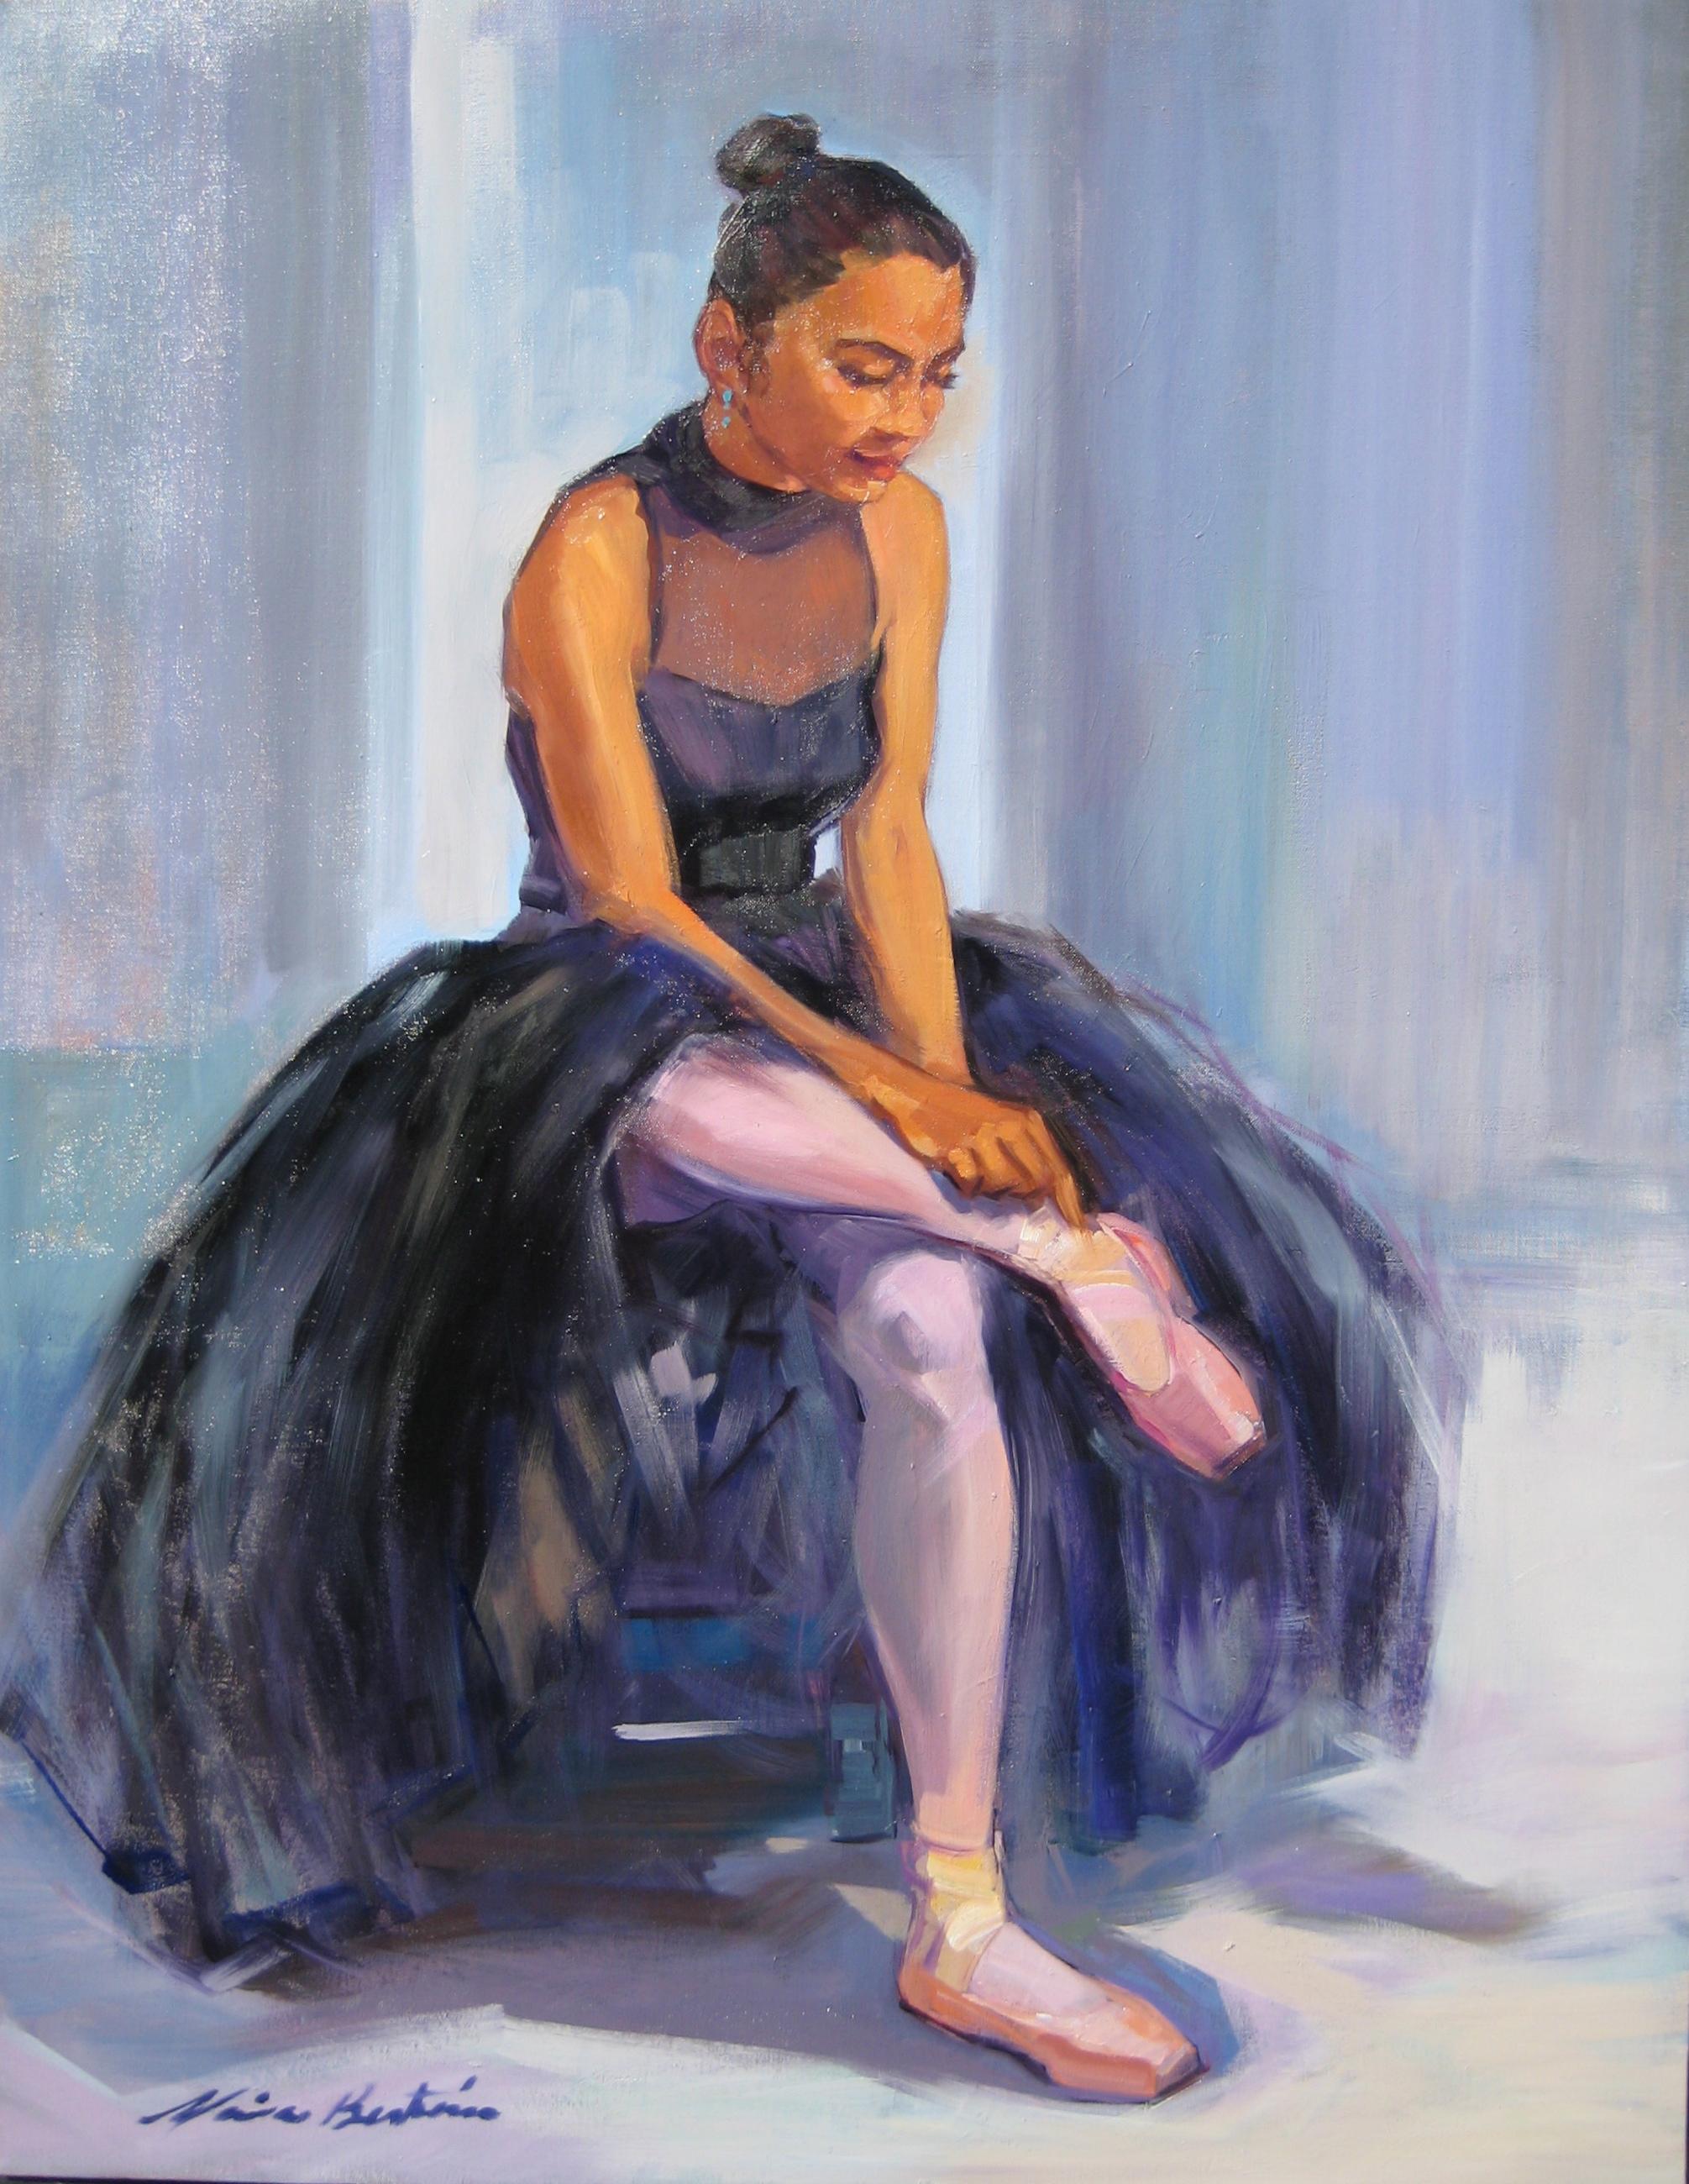 "Before The Dance" Large Impressionist Figure Oil Painting of Ballerina